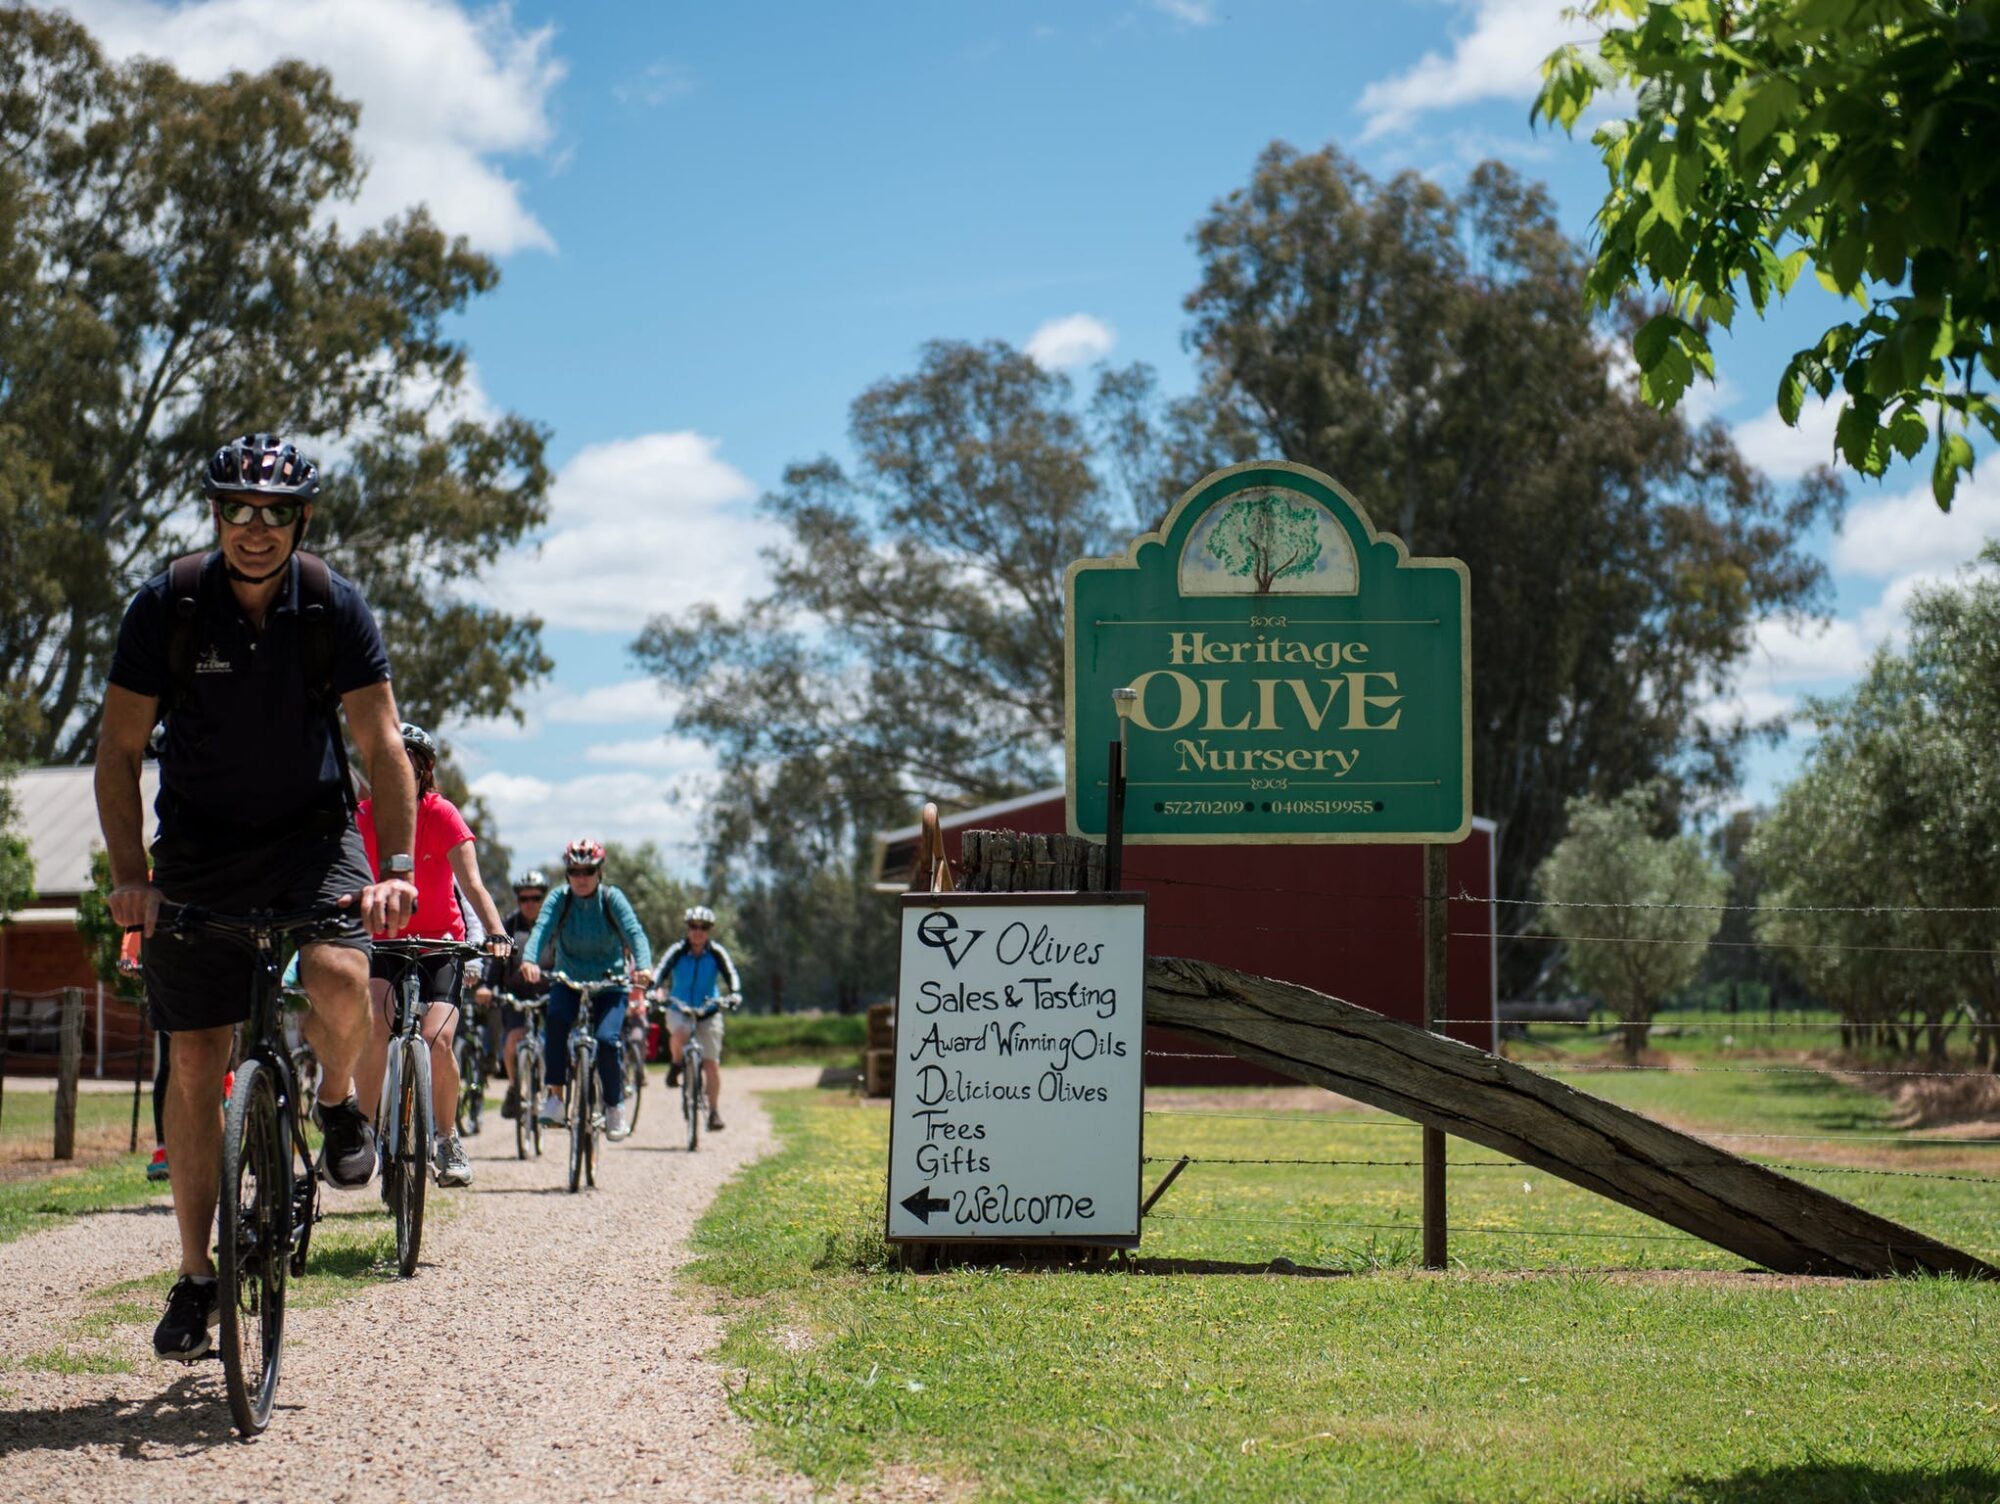 On a cycling tour in North East Victoria